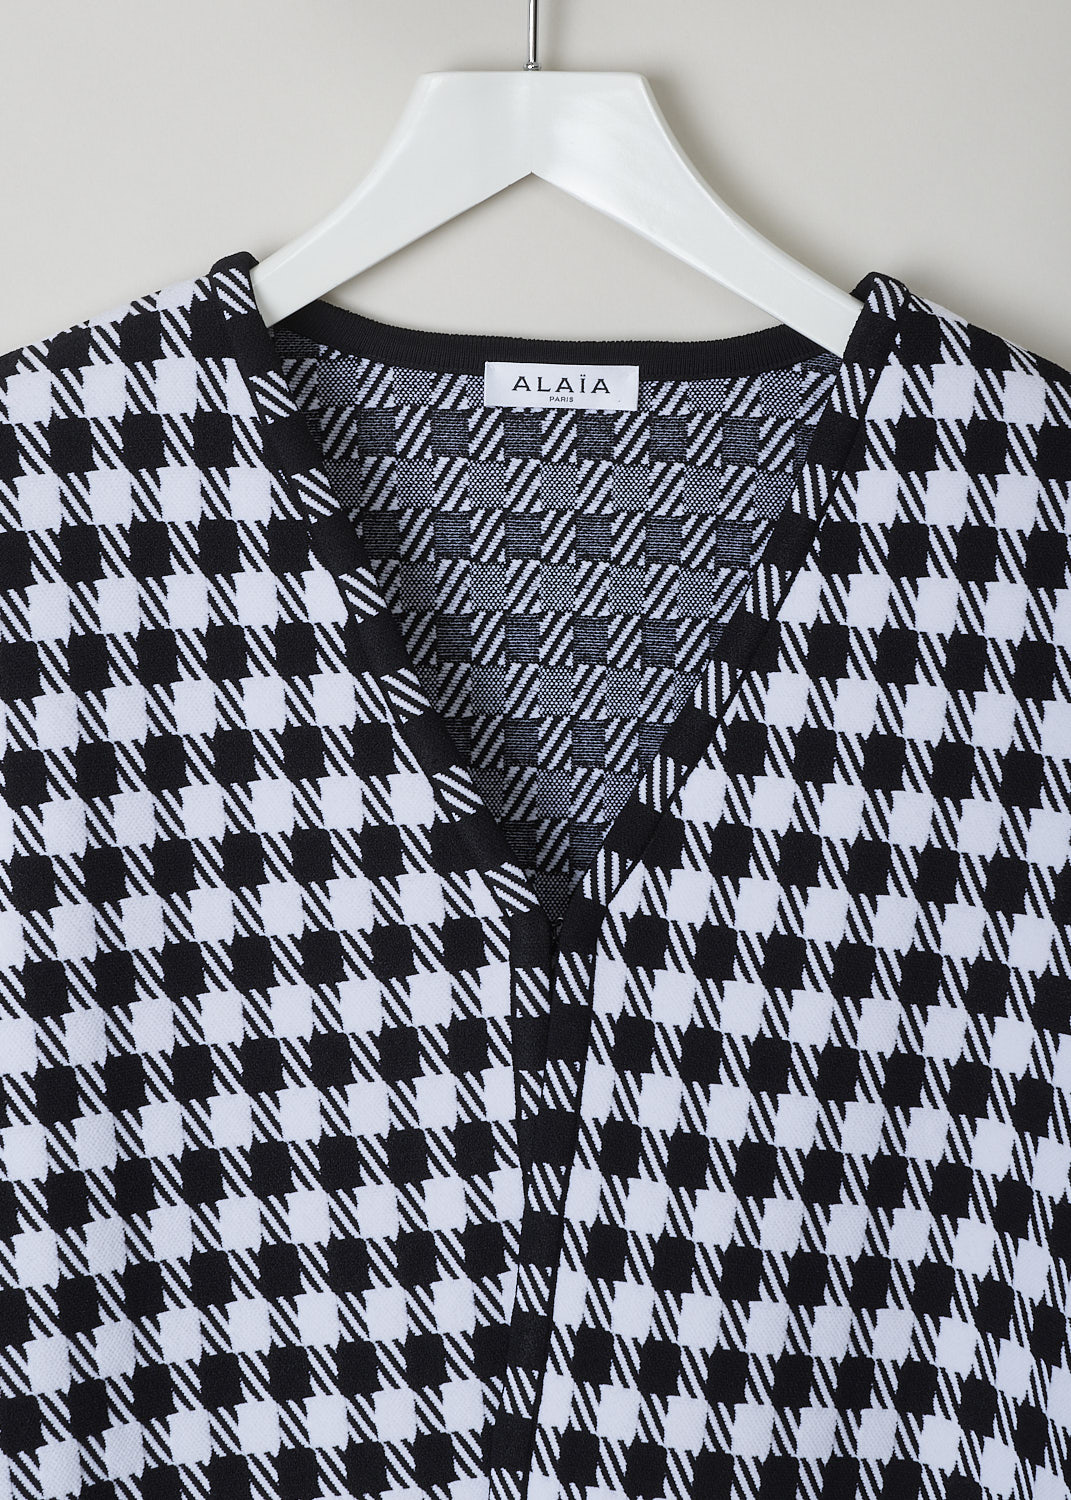 ALAÏA, CROPPED HOUNDSTOOTH PRINTED JACKET, AA9V10432M710_HOUNDSTOOTH_991, Black, White, Print, Detail, This long sleeve jacket has a magnified black and white Houndstooth print throughout. The jacket has a cropped length, with the hem falling to the hip. The jacket has an open front with just a single hook-closure on the V-necks end. The jacket has shoulder pads.


